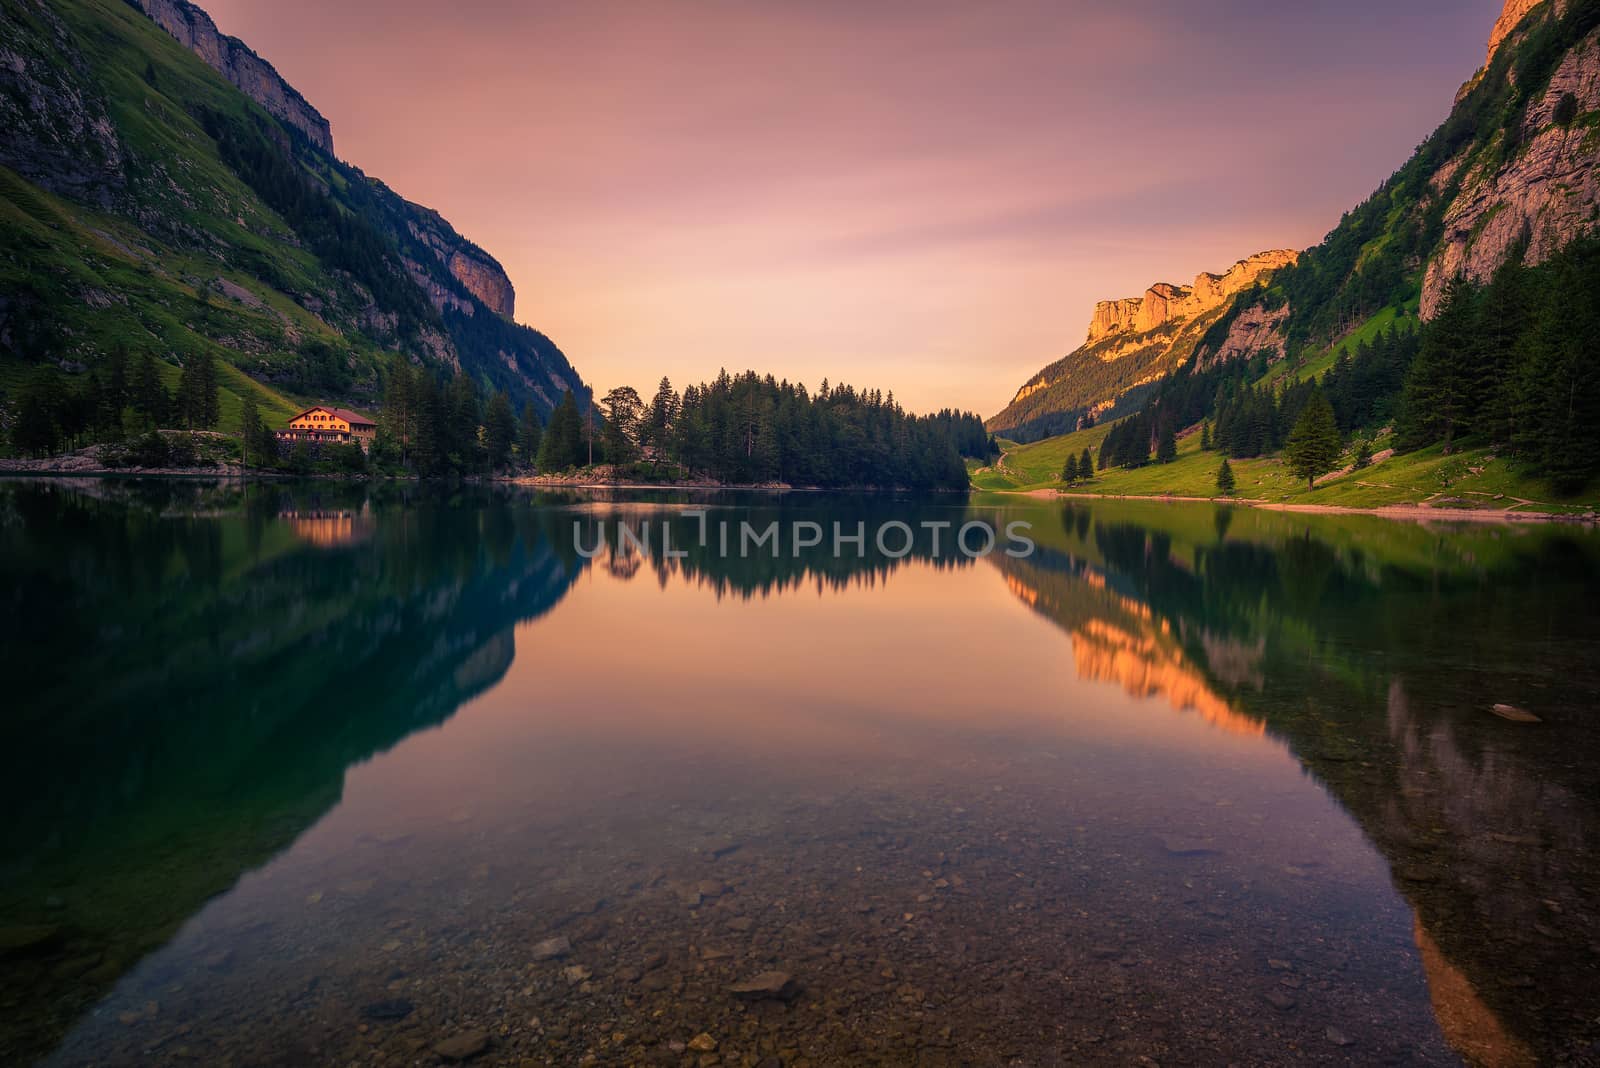 Sunset over the Seealpsee lake in the Appenzell region of Swiss Alps, Switzerland. Long exposure.